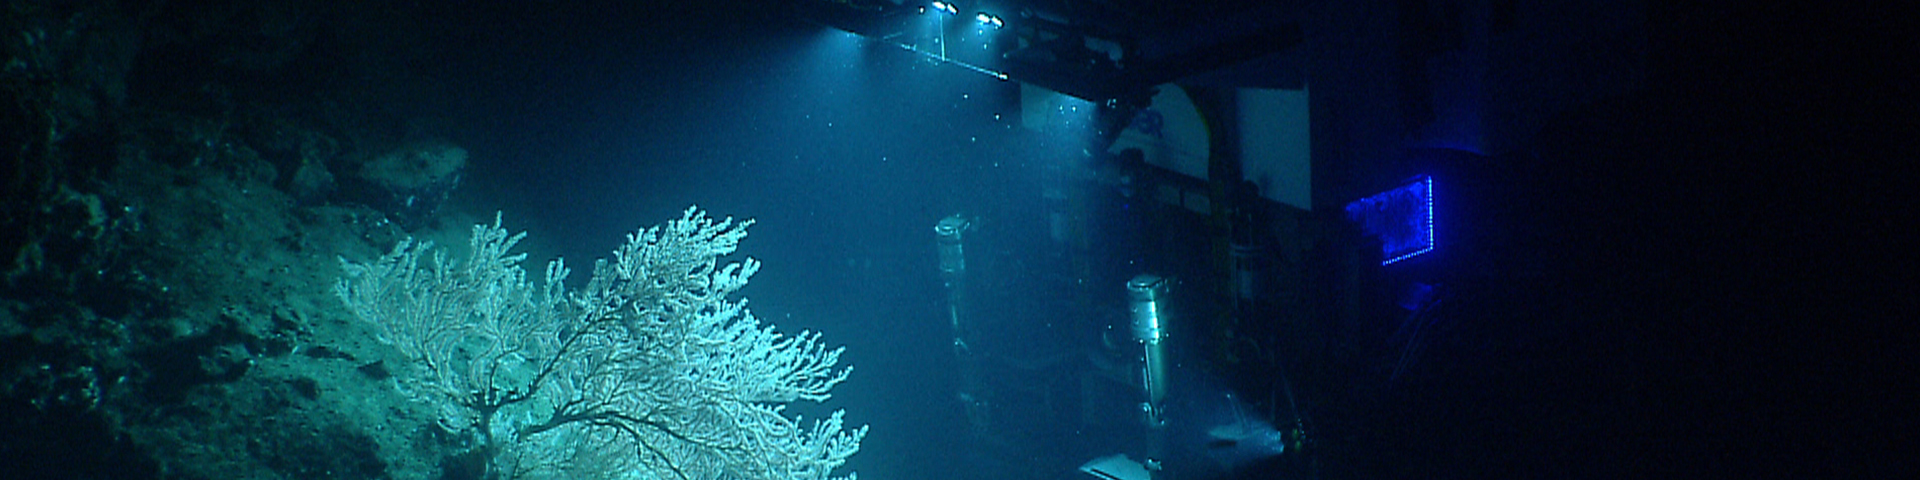 AA Remotely Operated Vehicle (ROV) exploring a deep coral reef habitat